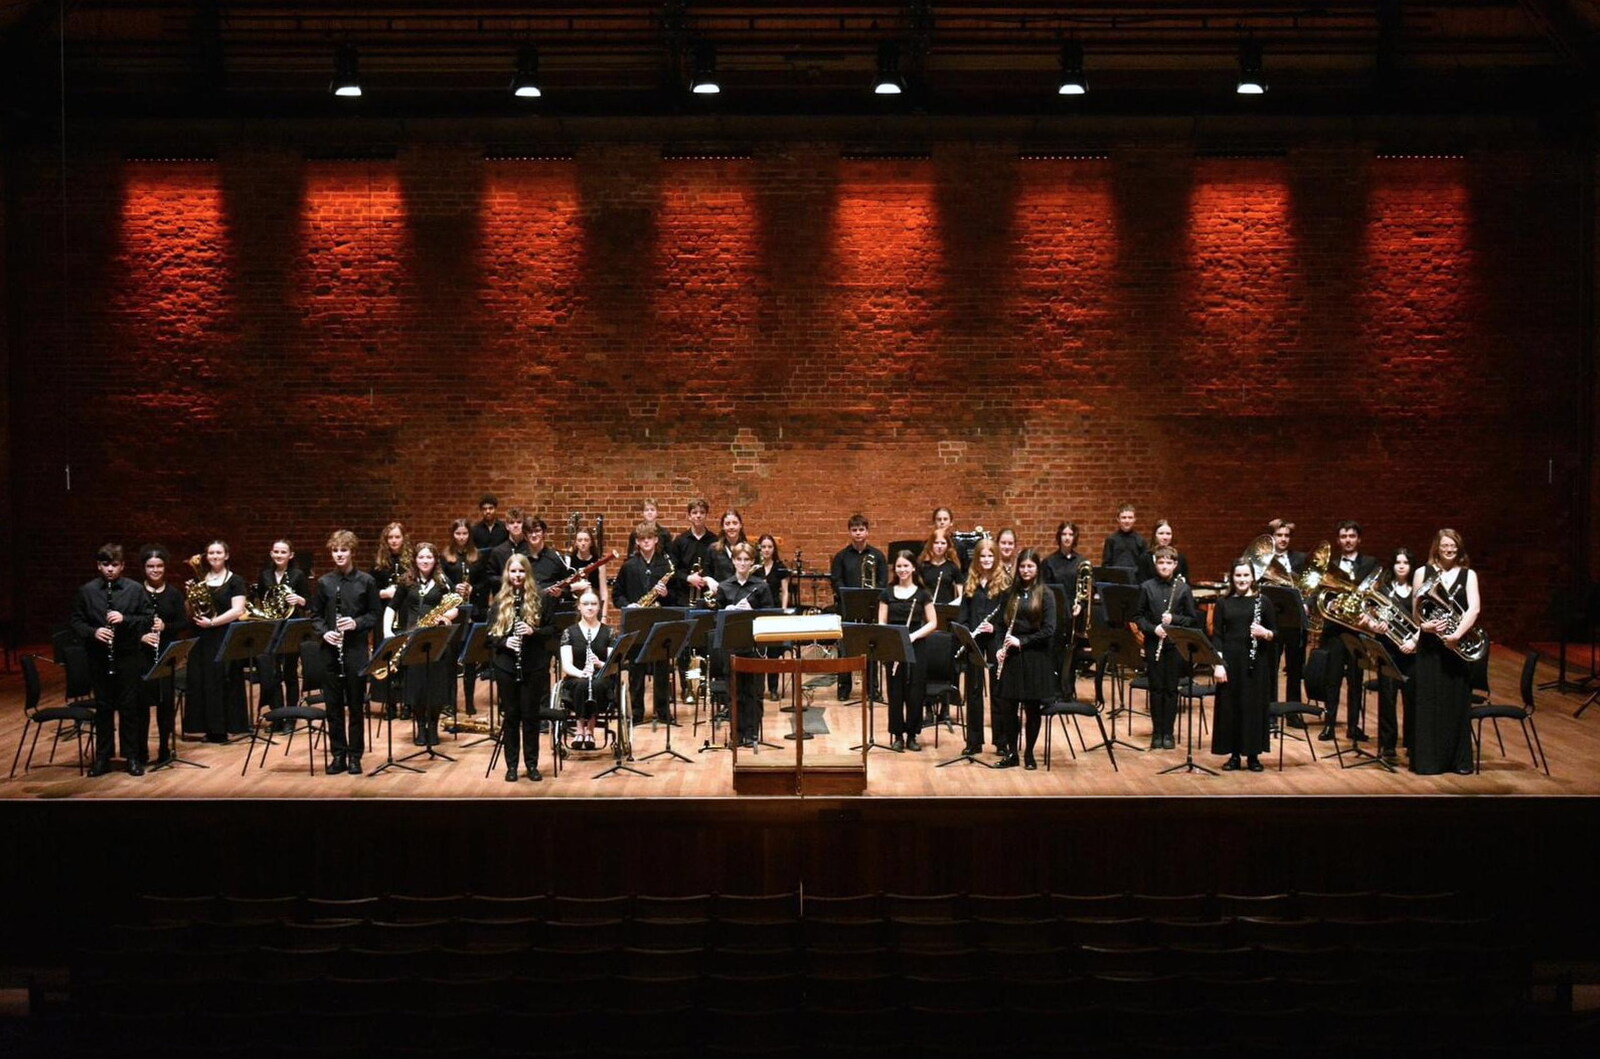 The SYWO are on stage at Snape Maltings from Fred and the Orchestra, Snape Maltings, Suffolk - 5th April